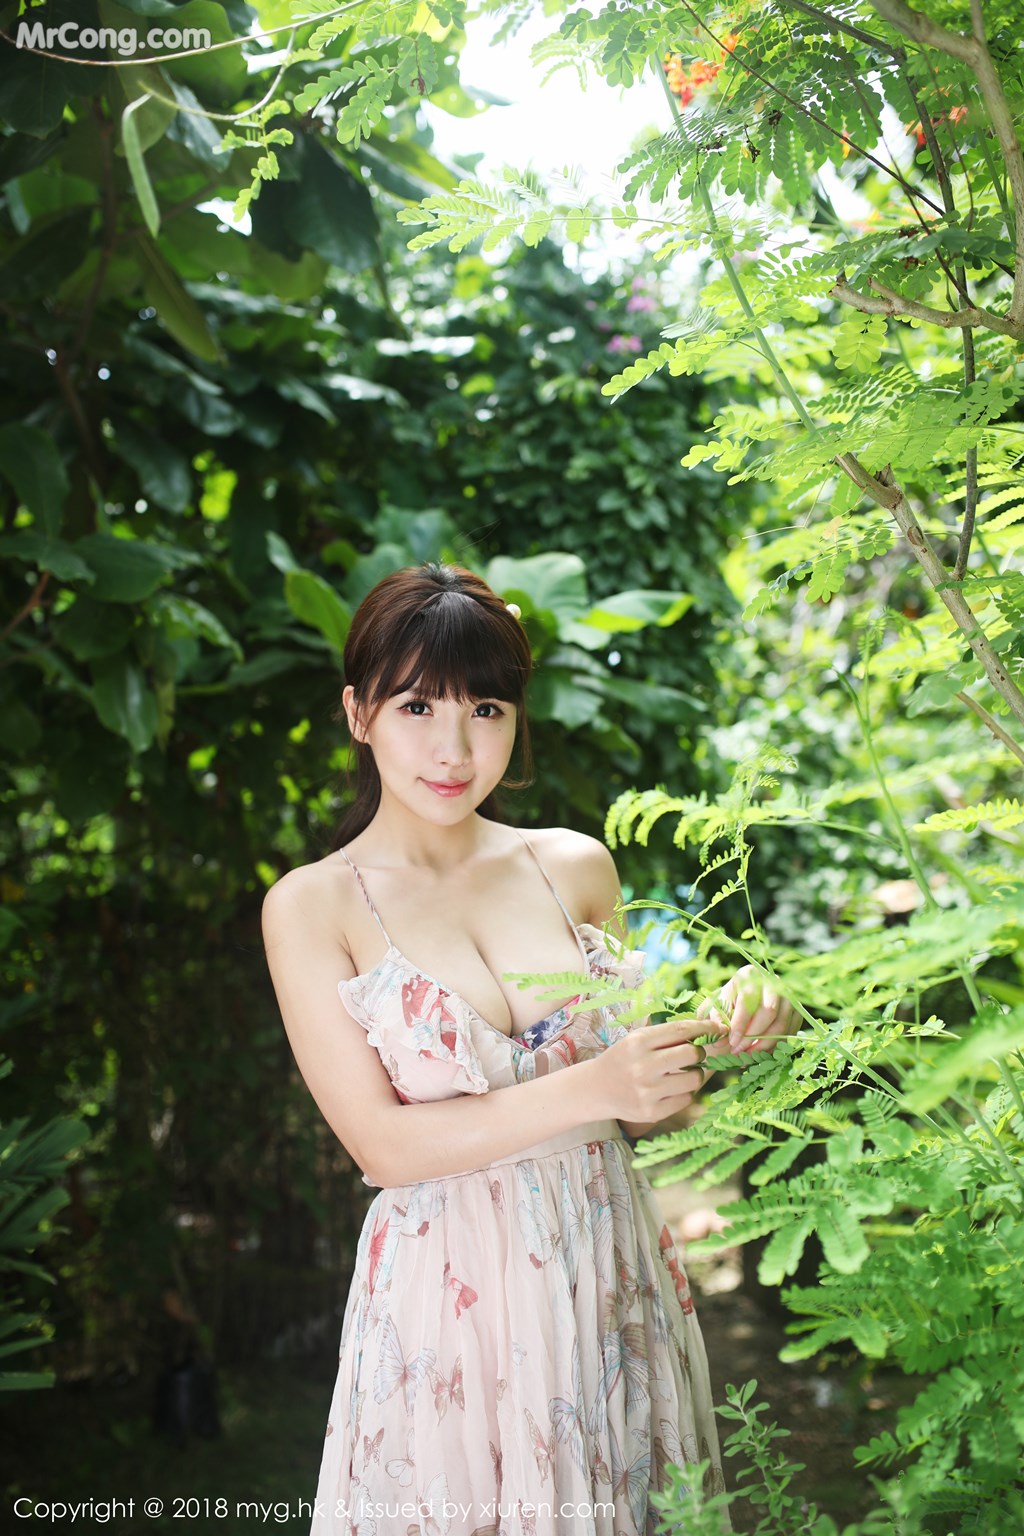 MyGirl Vol.276: Sunny Model (晓 茜) (66 pictures) photo 2-5